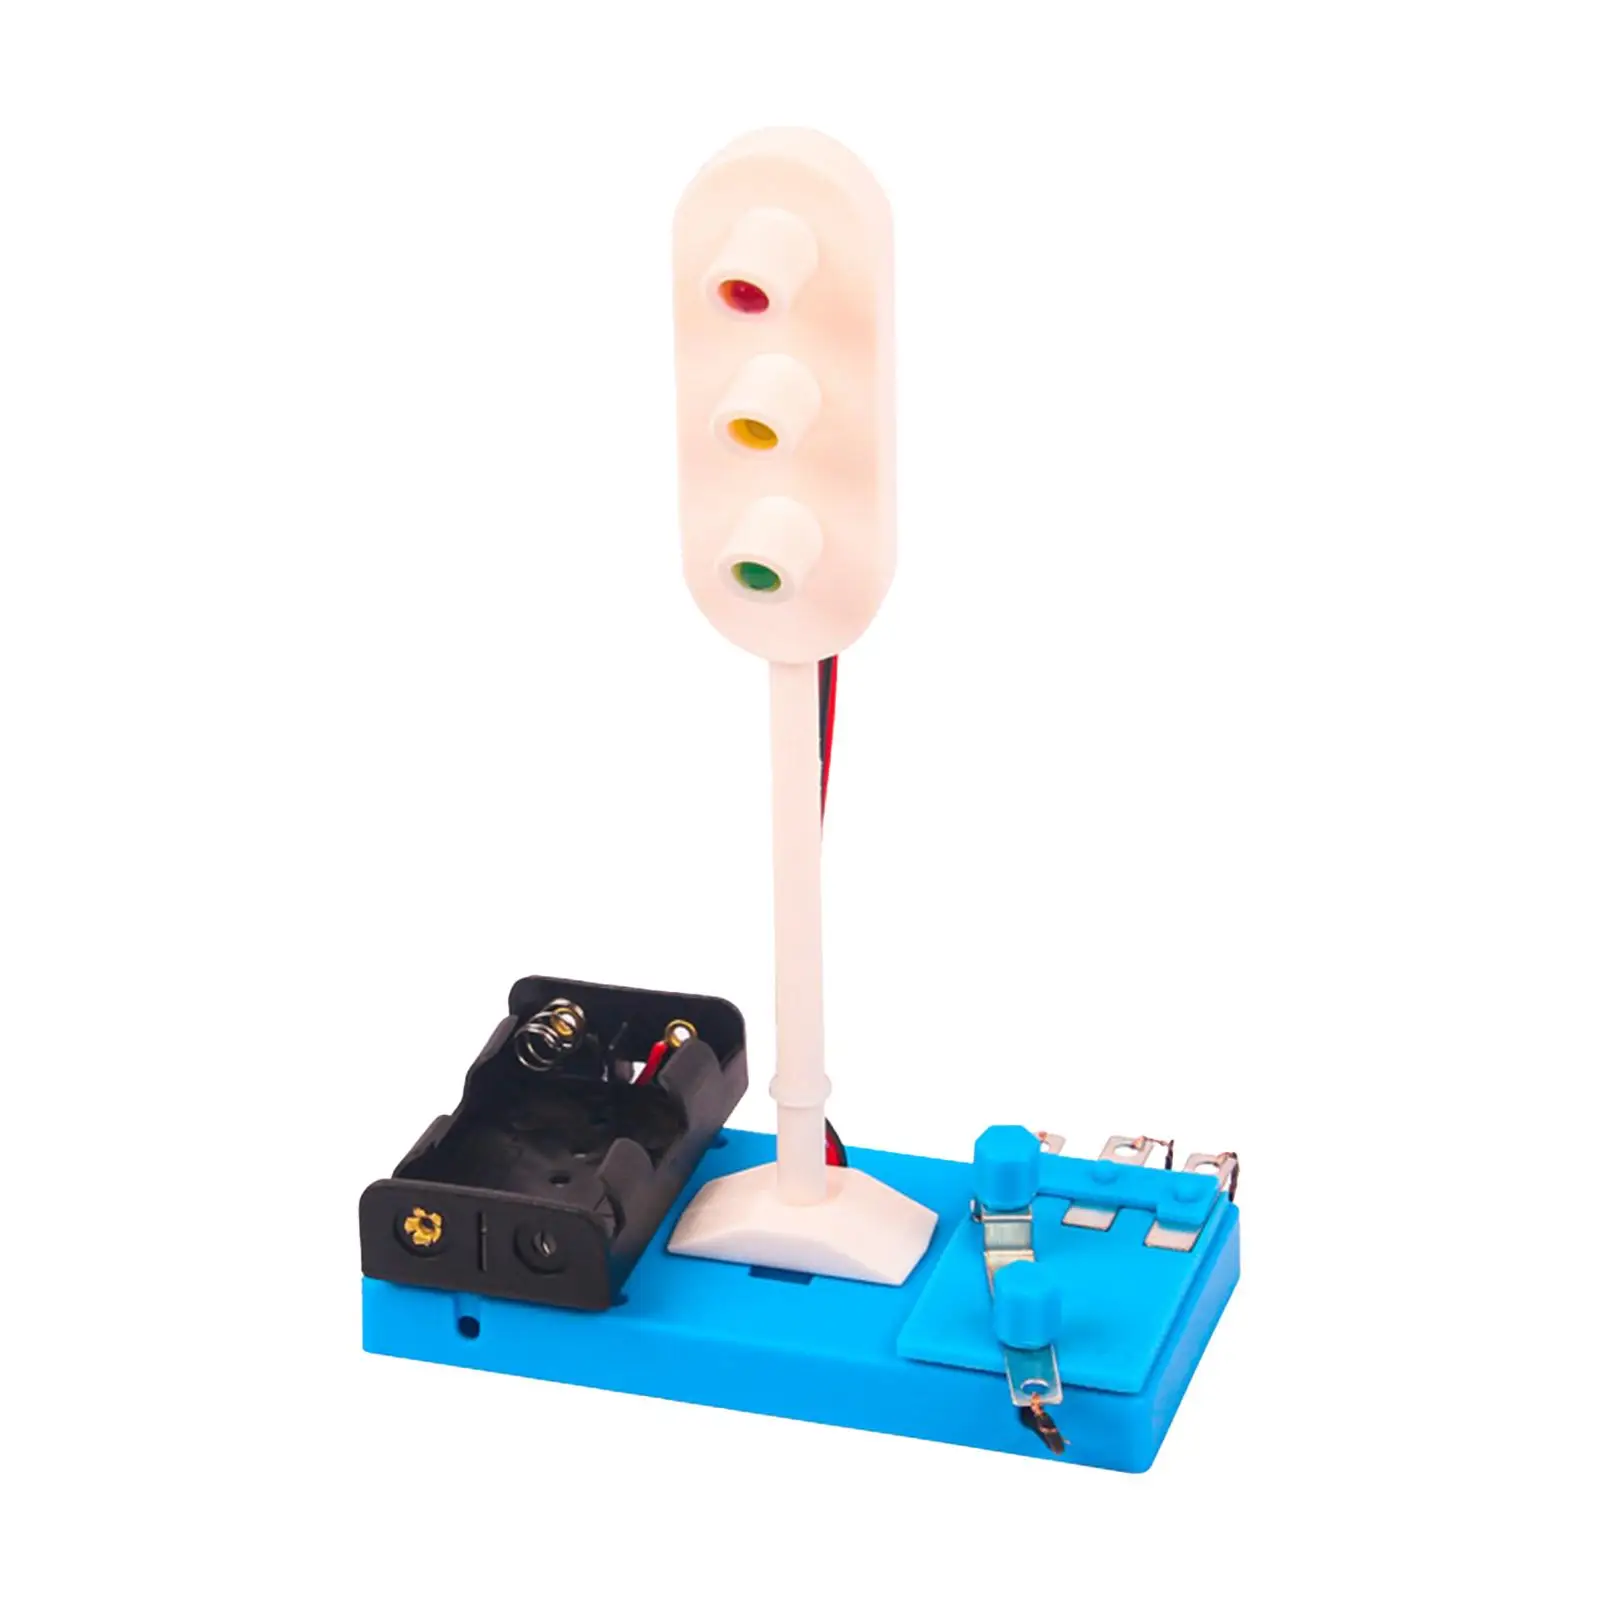 Traffic Light Toy Students Assembly Set Simple Circuit Physics Study Electronic Assembly Toy Educational Toy Traffic Light Model